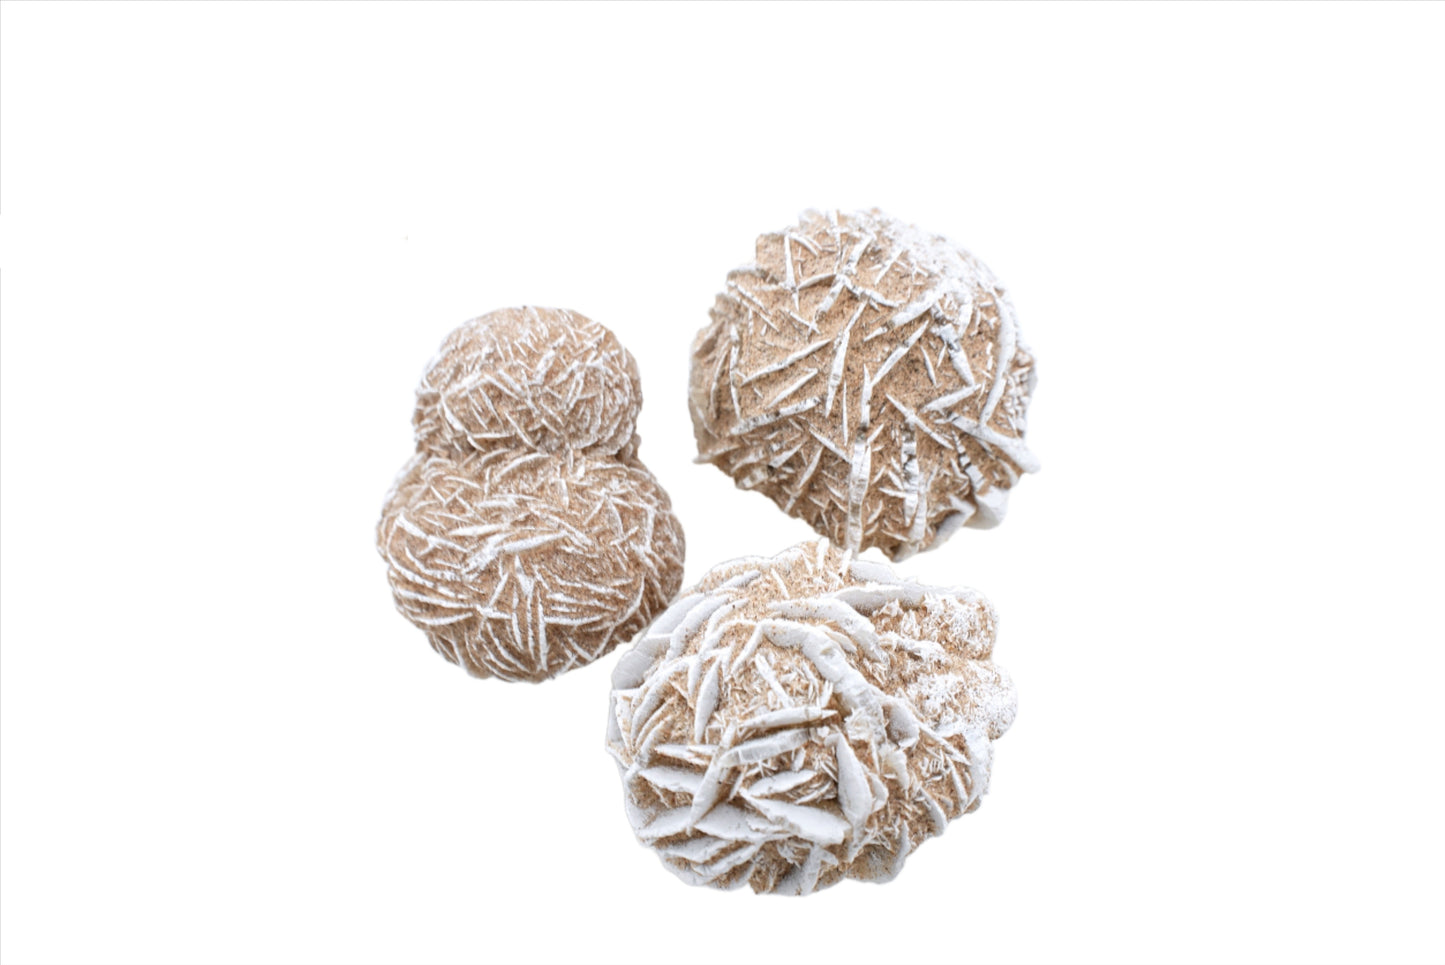 Natural, Hand-Selected Desert Rose Rough Stone Individual Pieces